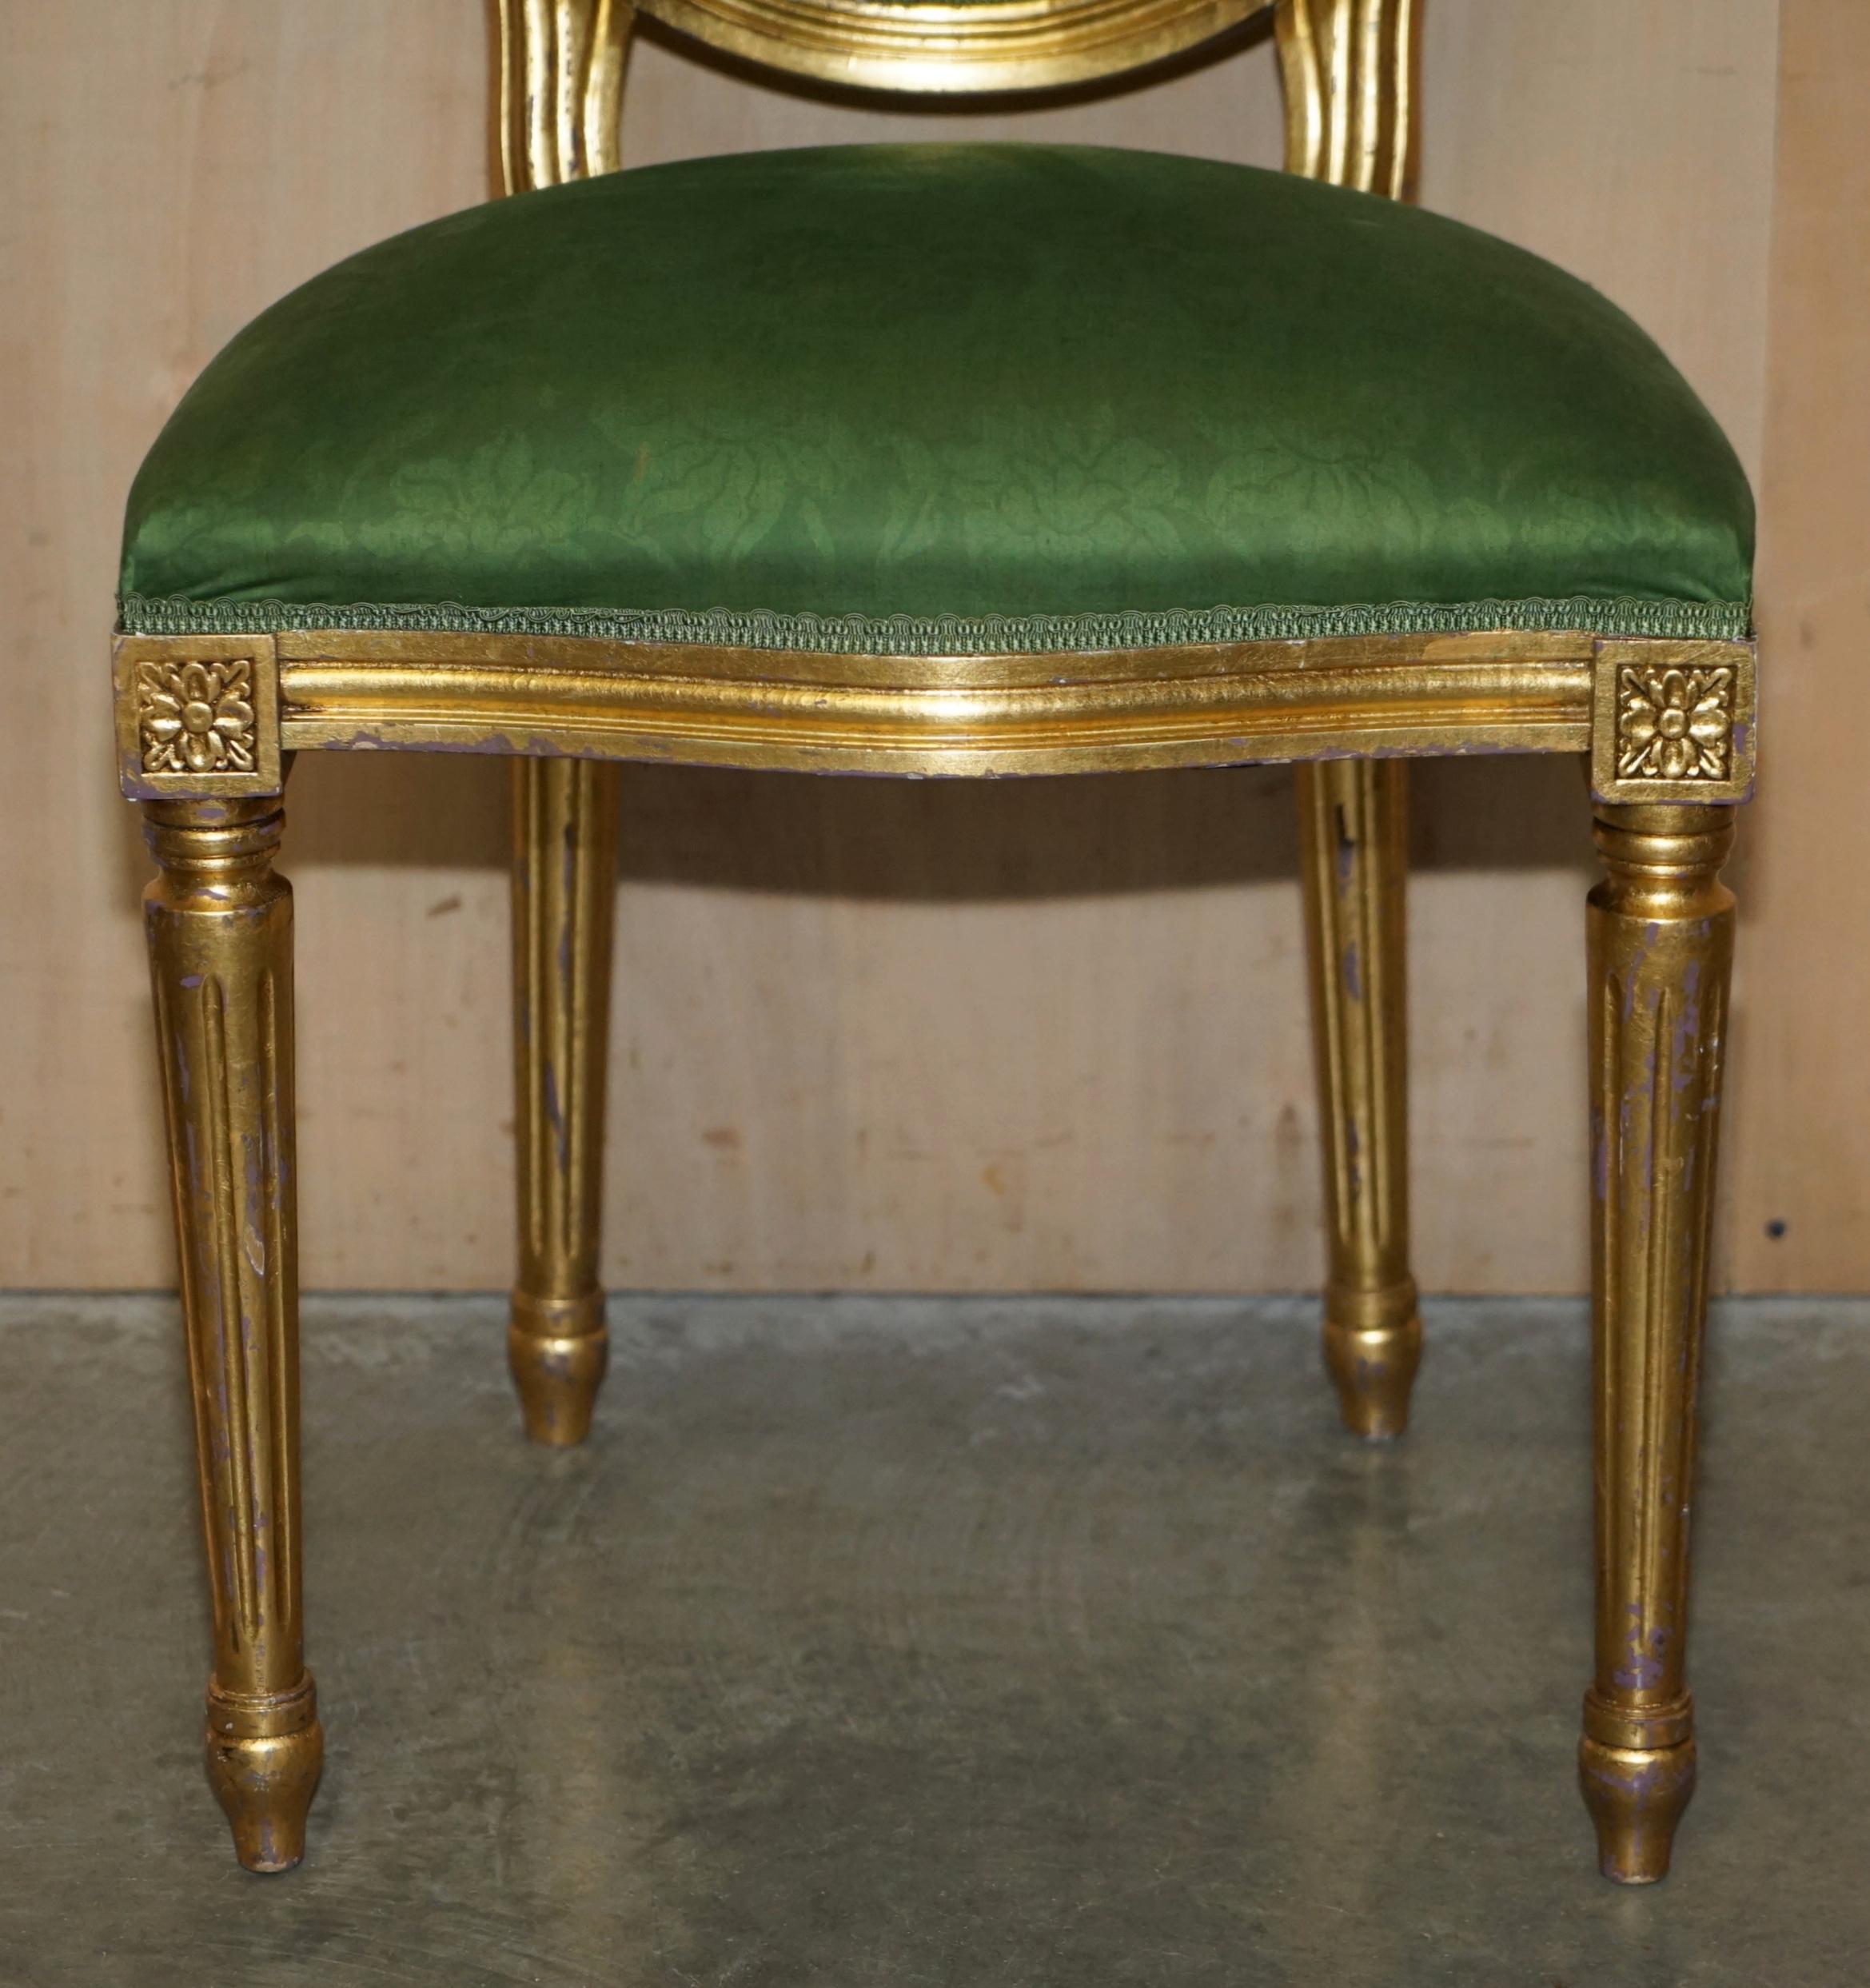 EiGHT ANTIQUE LOUIS XVI  Style DINING CHAIRS FROM LADY DIANA'S SPENCER HOUSE 8 (Mittleres 19. Jahrhundert) im Angebot